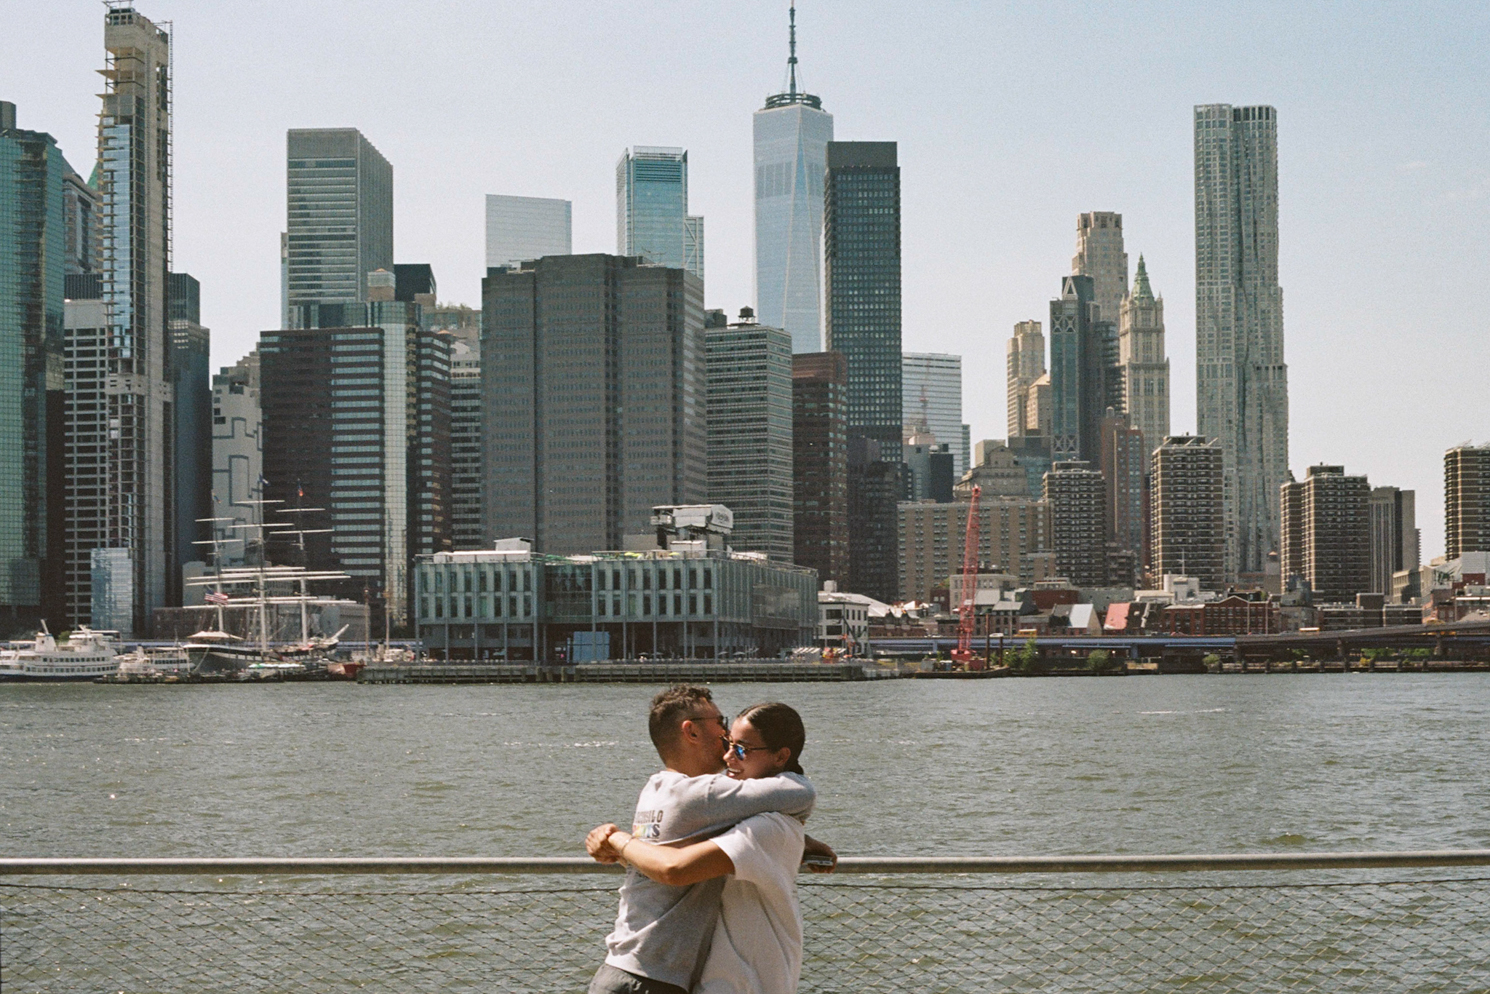 A man and a woman embracing at a waterfront. The downtown Manhattan skyline is in the background.